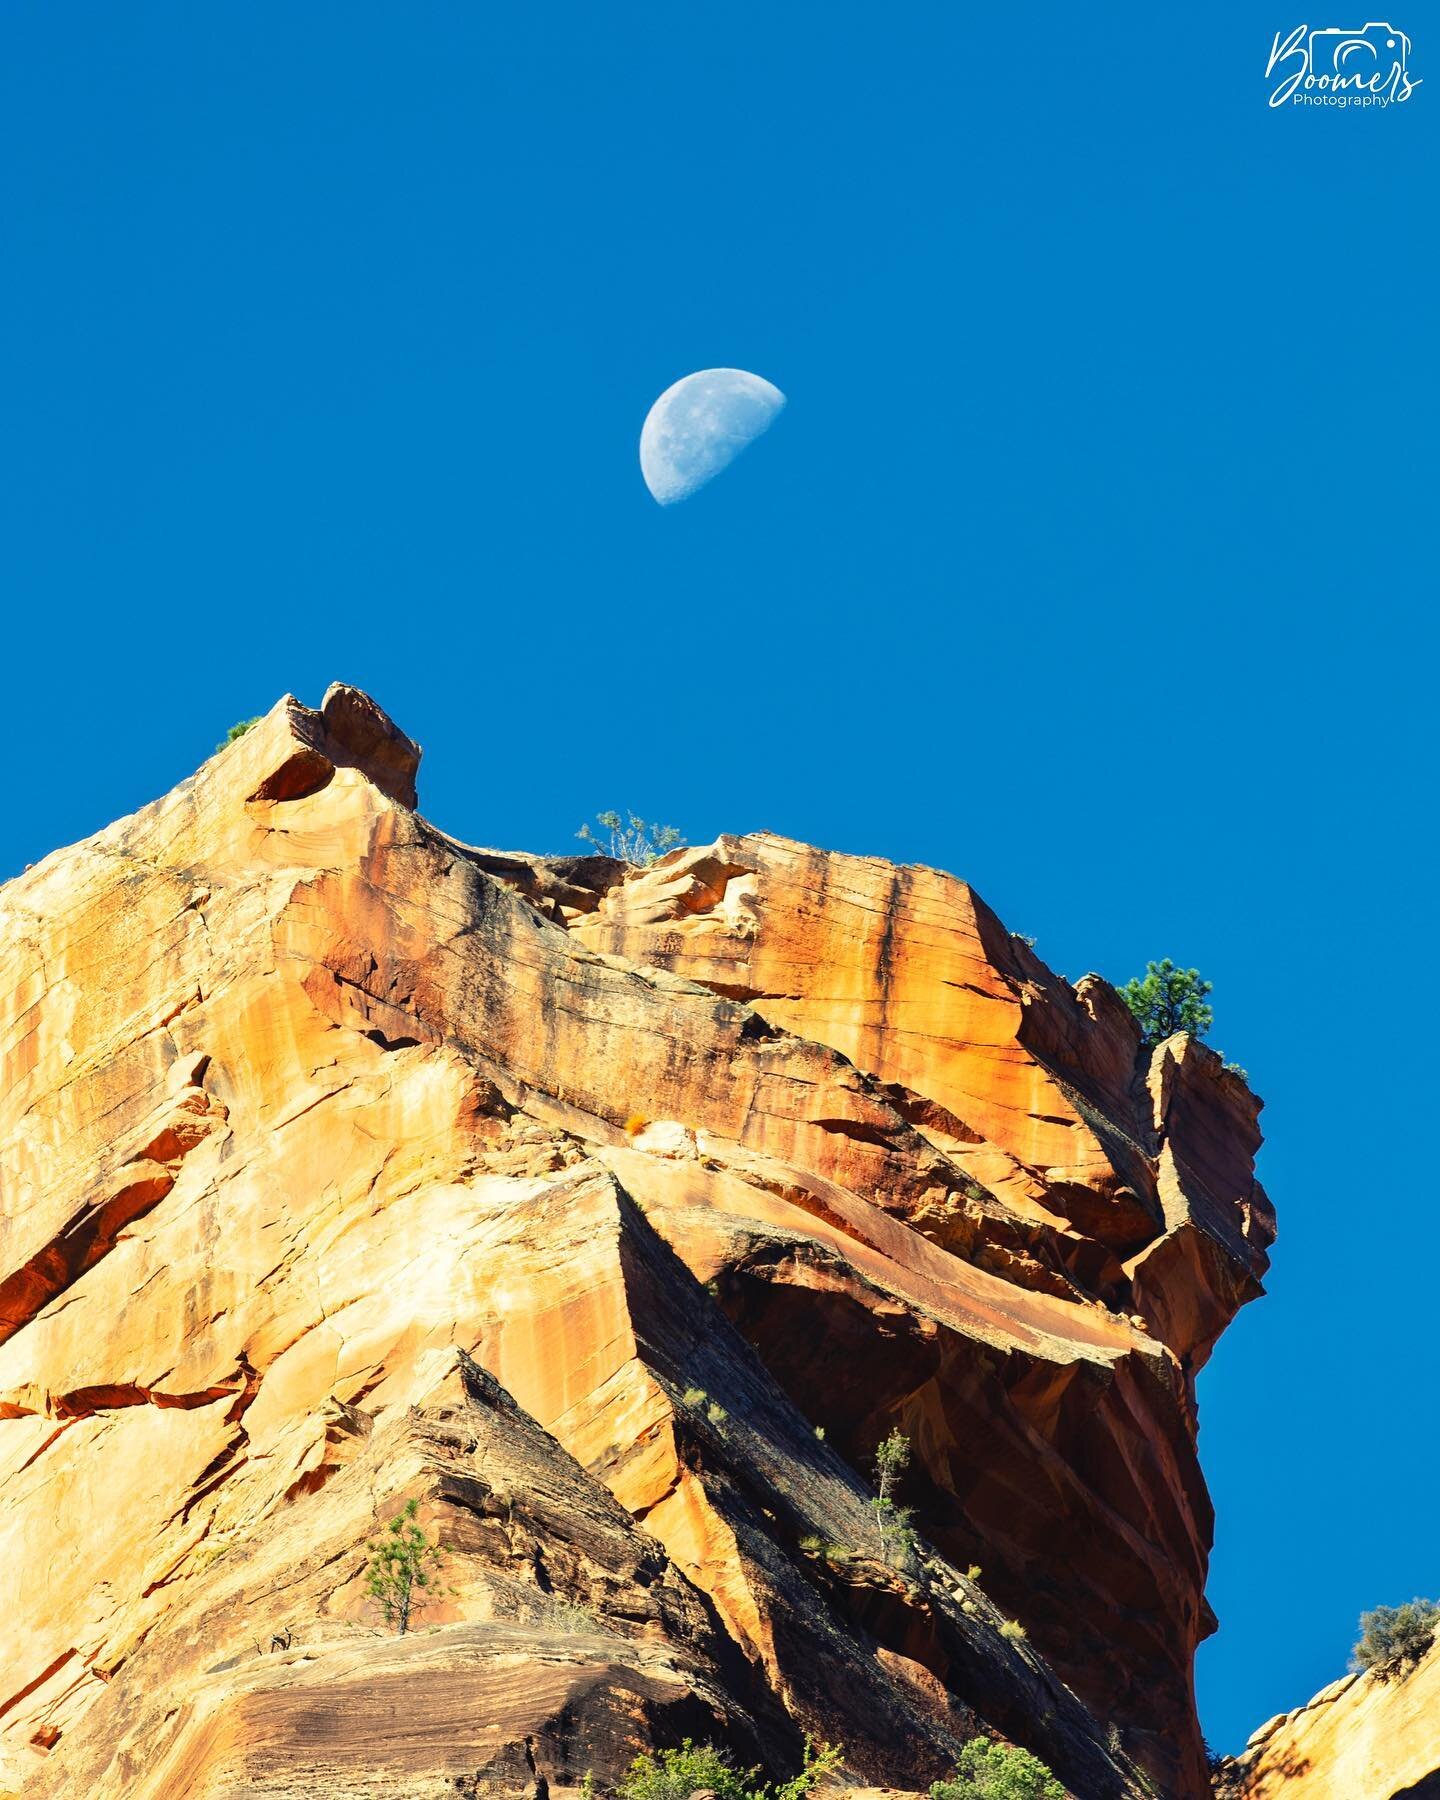 Took this shot a couple weeks ago on a trip through @zionnps It&rsquo;s a pretty incredible place. Red rock mountains that just come out of no where. I looked up and saw the moon out mid day over this tower and had to stop for a quick photo.